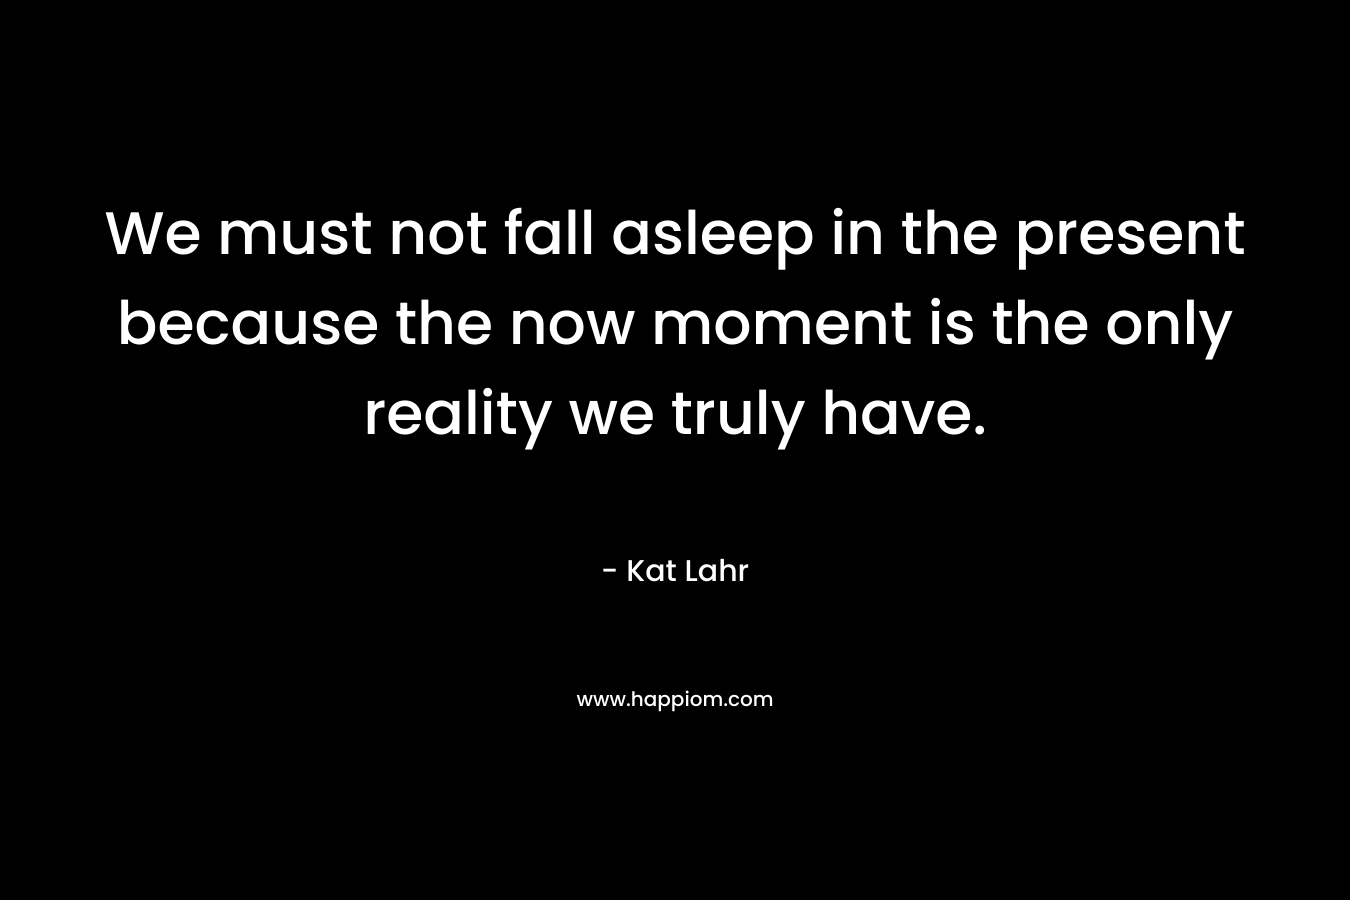 We must not fall asleep in the present because the now moment is the only reality we truly have.